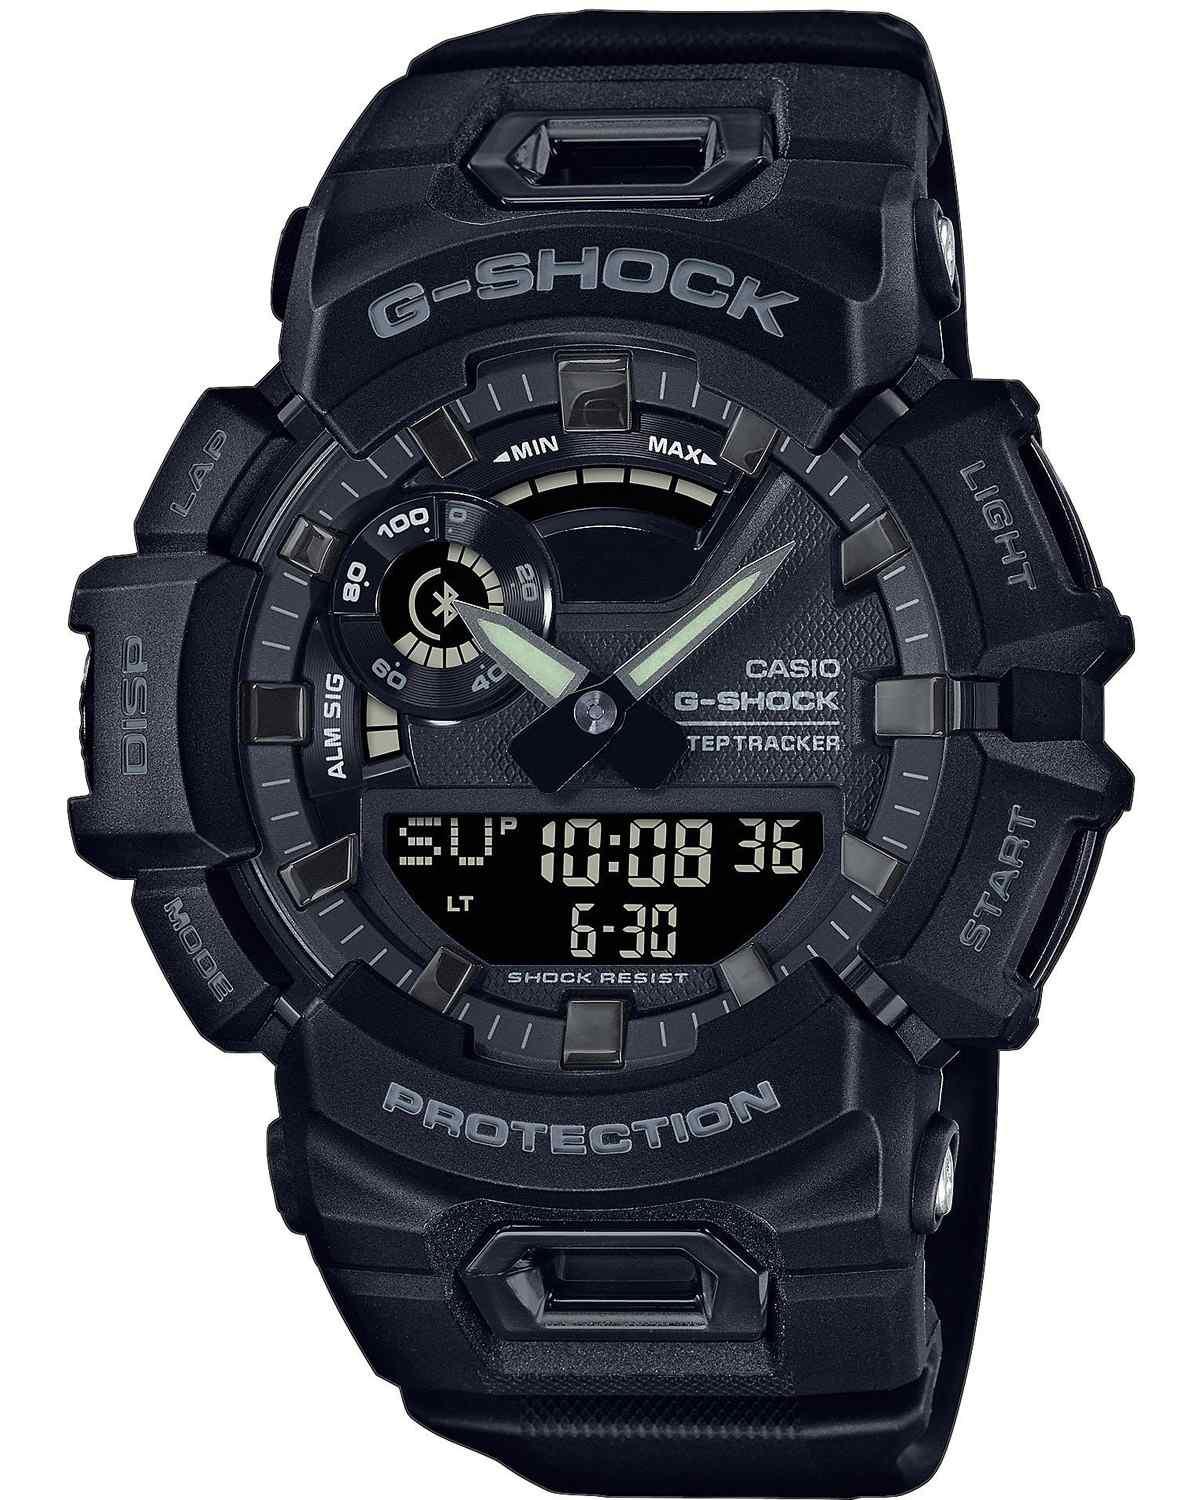 CASIO G-Shock Smartwatch Bluetooth Chronograph - GBA-900-1AER, Black case with Black & Gray Rubber Strap